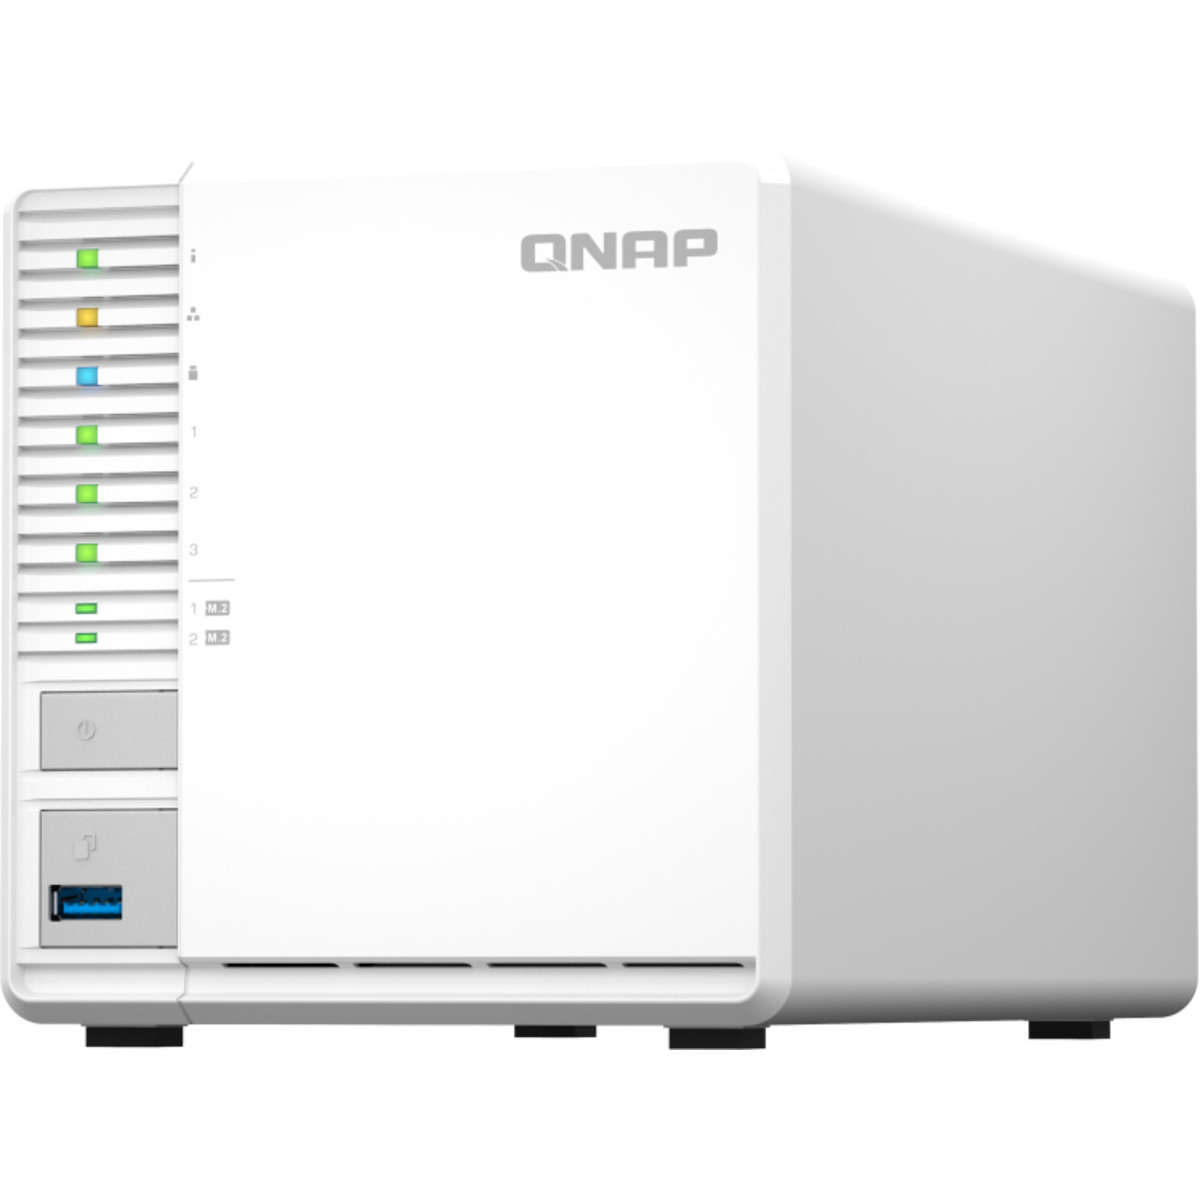 QNAP TS-364 8tb 3-Bay Desktop Multimedia / Power User / Business NAS - Network Attached Storage Device 2x4tb Western Digital Red Plus WD40EFPX 3.5 5400rpm SATA 6Gb/s HDD NAS Class Drives Installed - Burn-In Tested TS-364